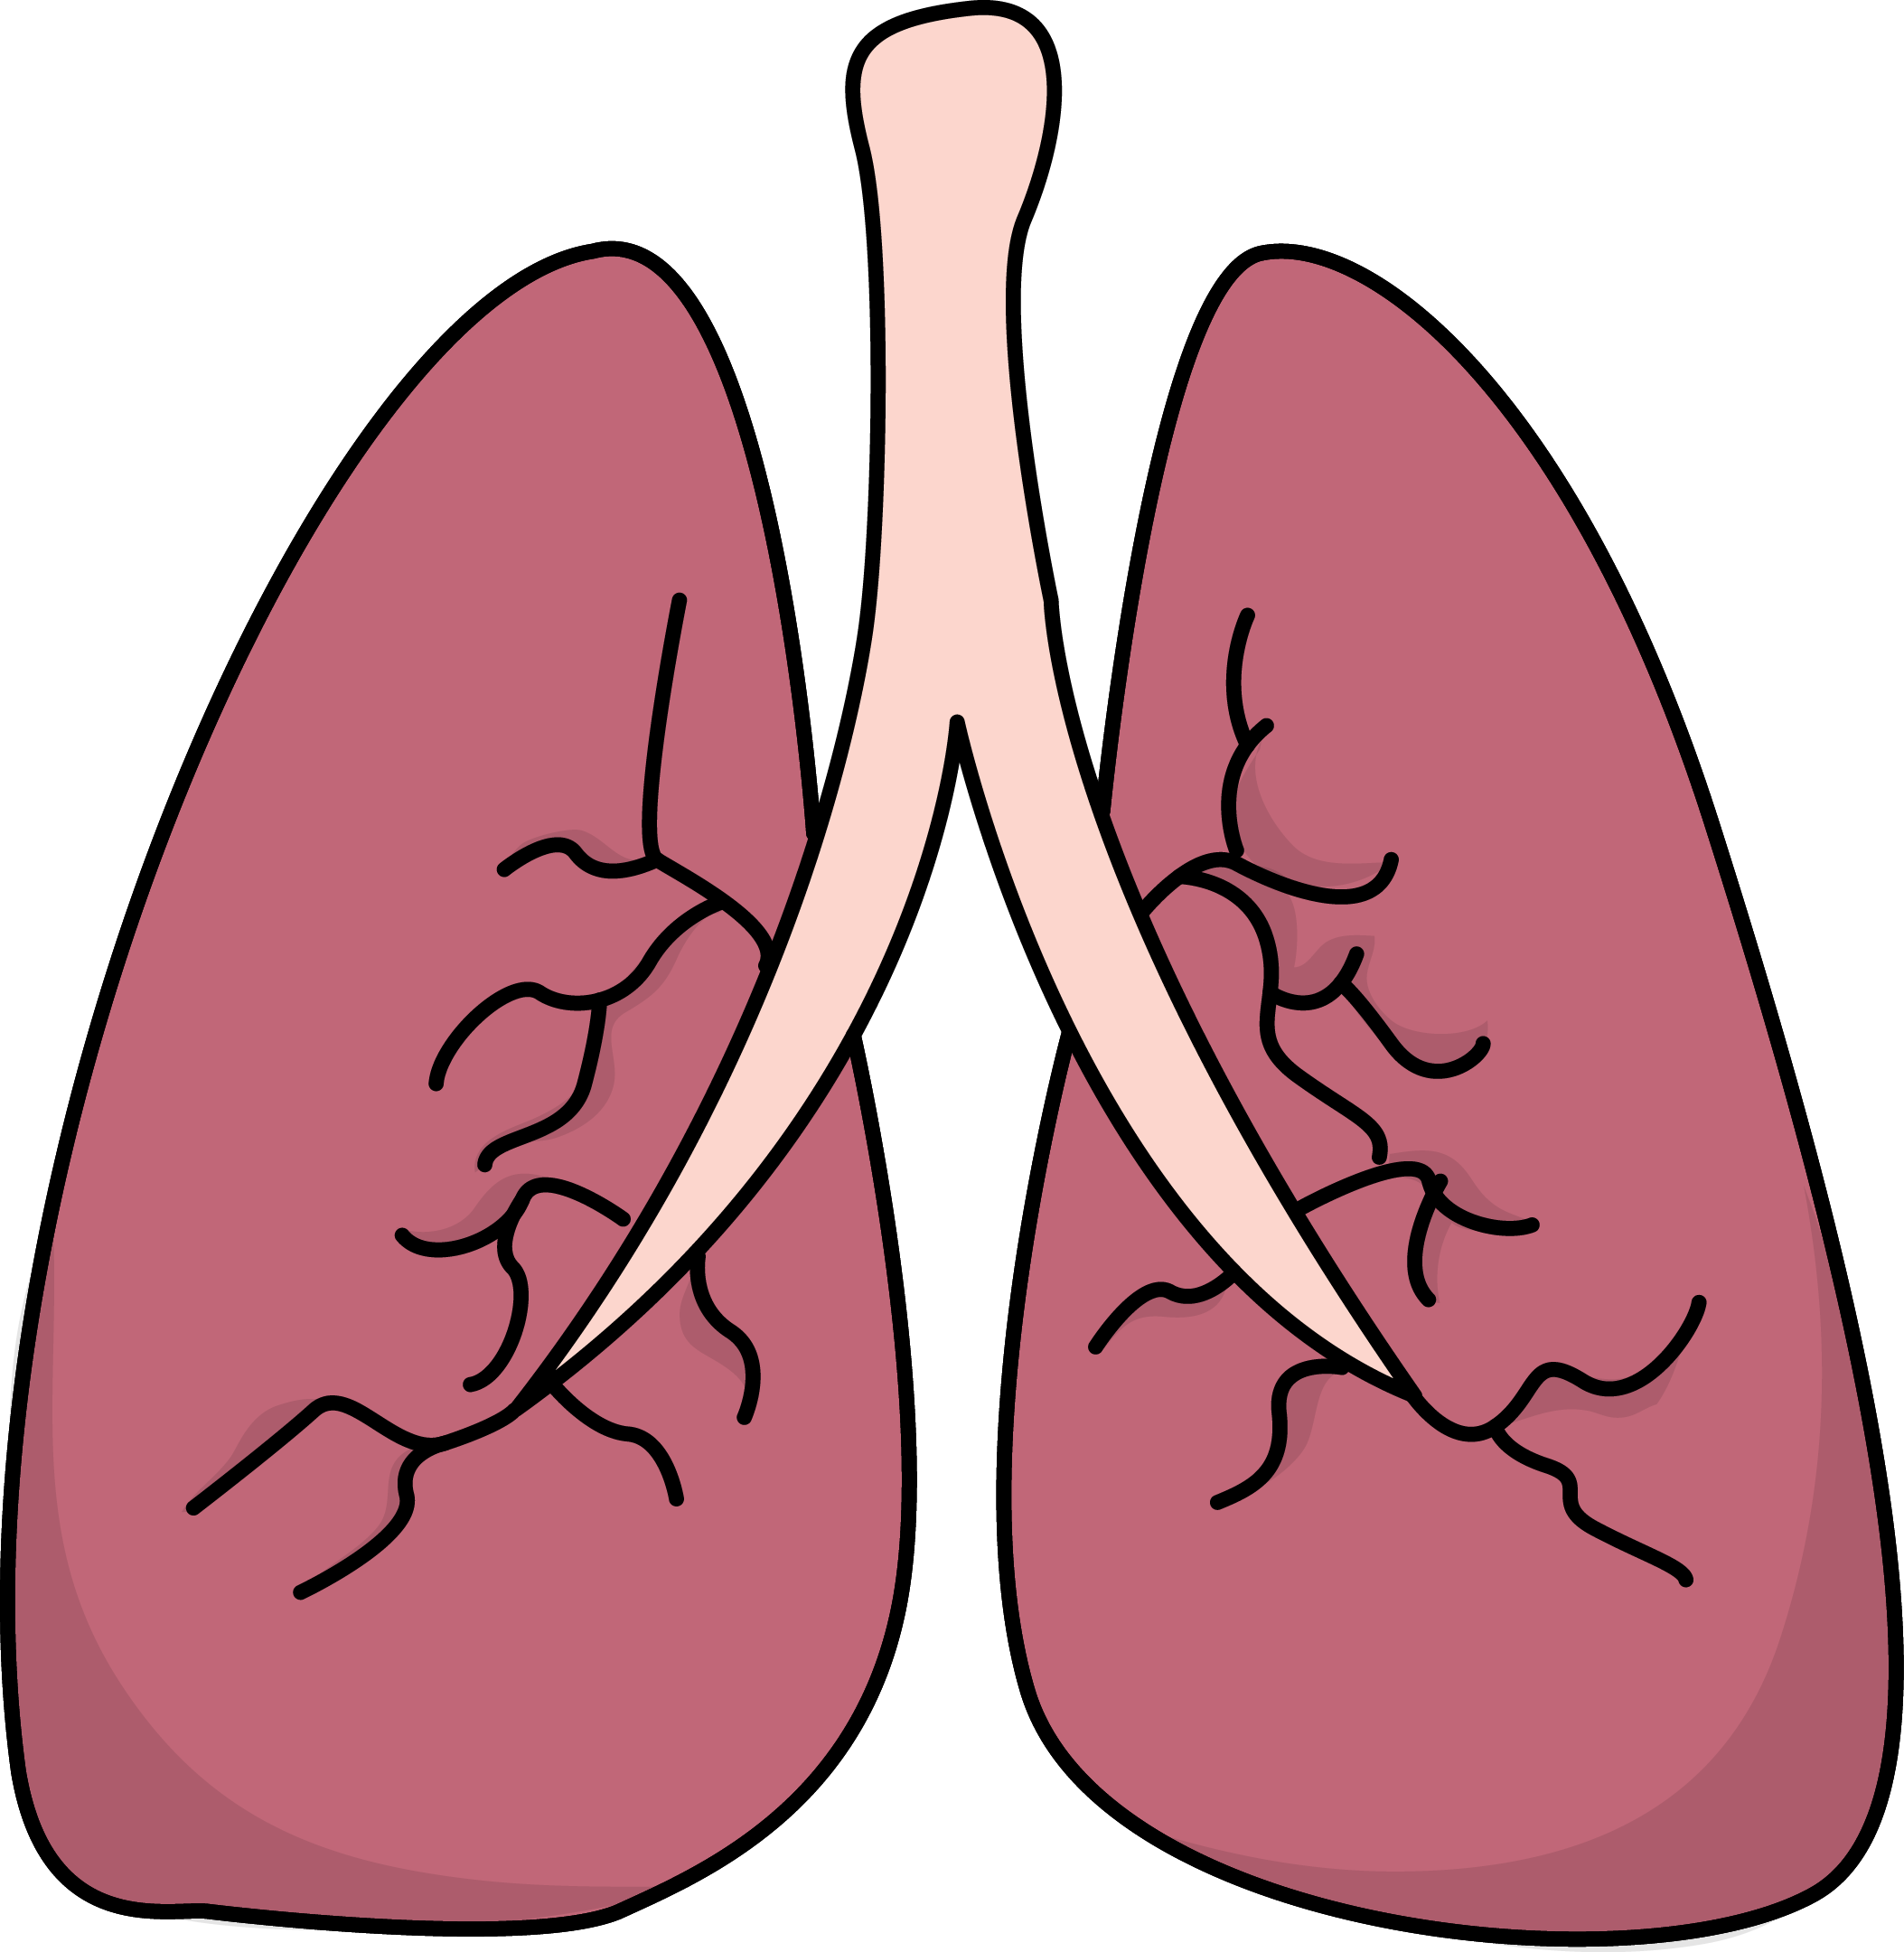 The Human Lung For Kids Clipart With Labels - ClipArt Best